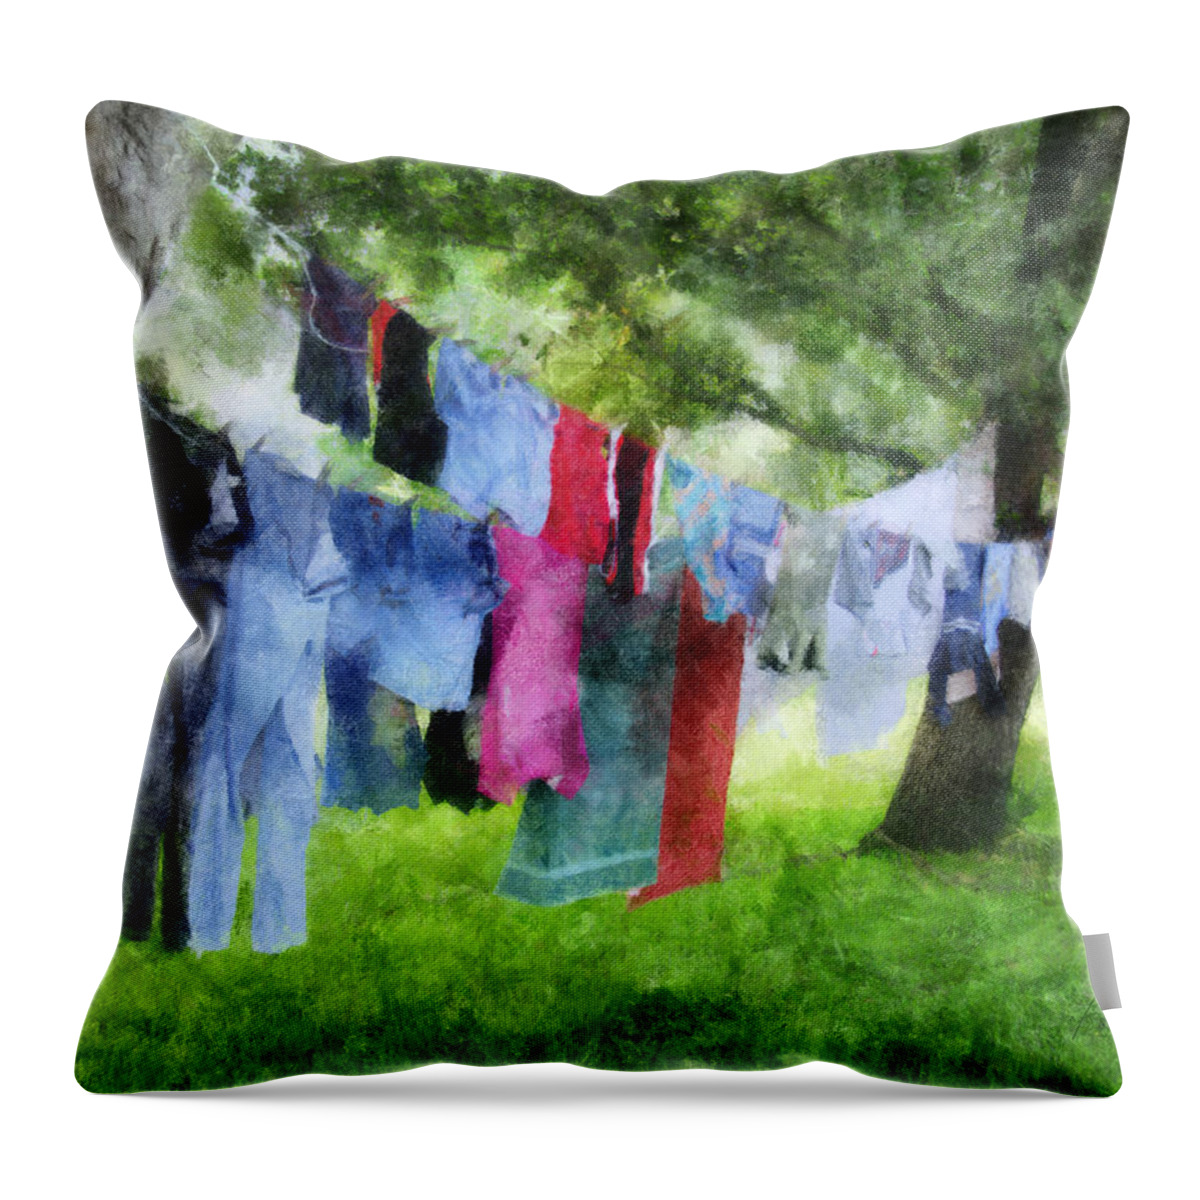 Laundry. Wash; Washing; Clothes; Line; Clothesline; Hung; Hanging; Dry; Drying; Trees; Oaks Throw Pillow featuring the digital art Laundry Line by Frances Miller